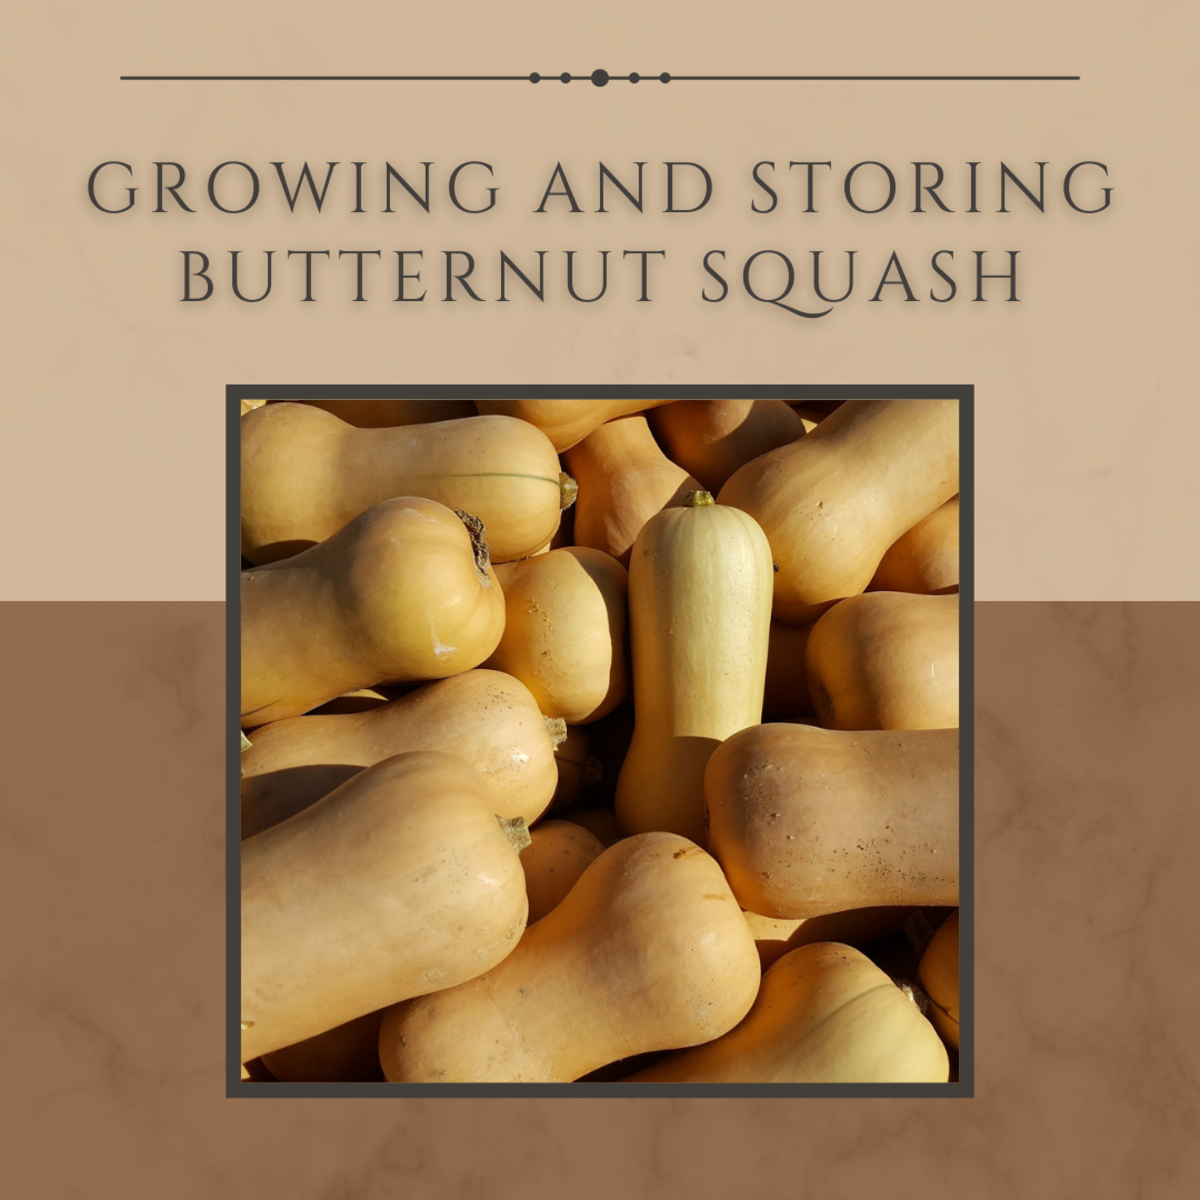 This article will provide all the information you'll need to grow and store your own squash.